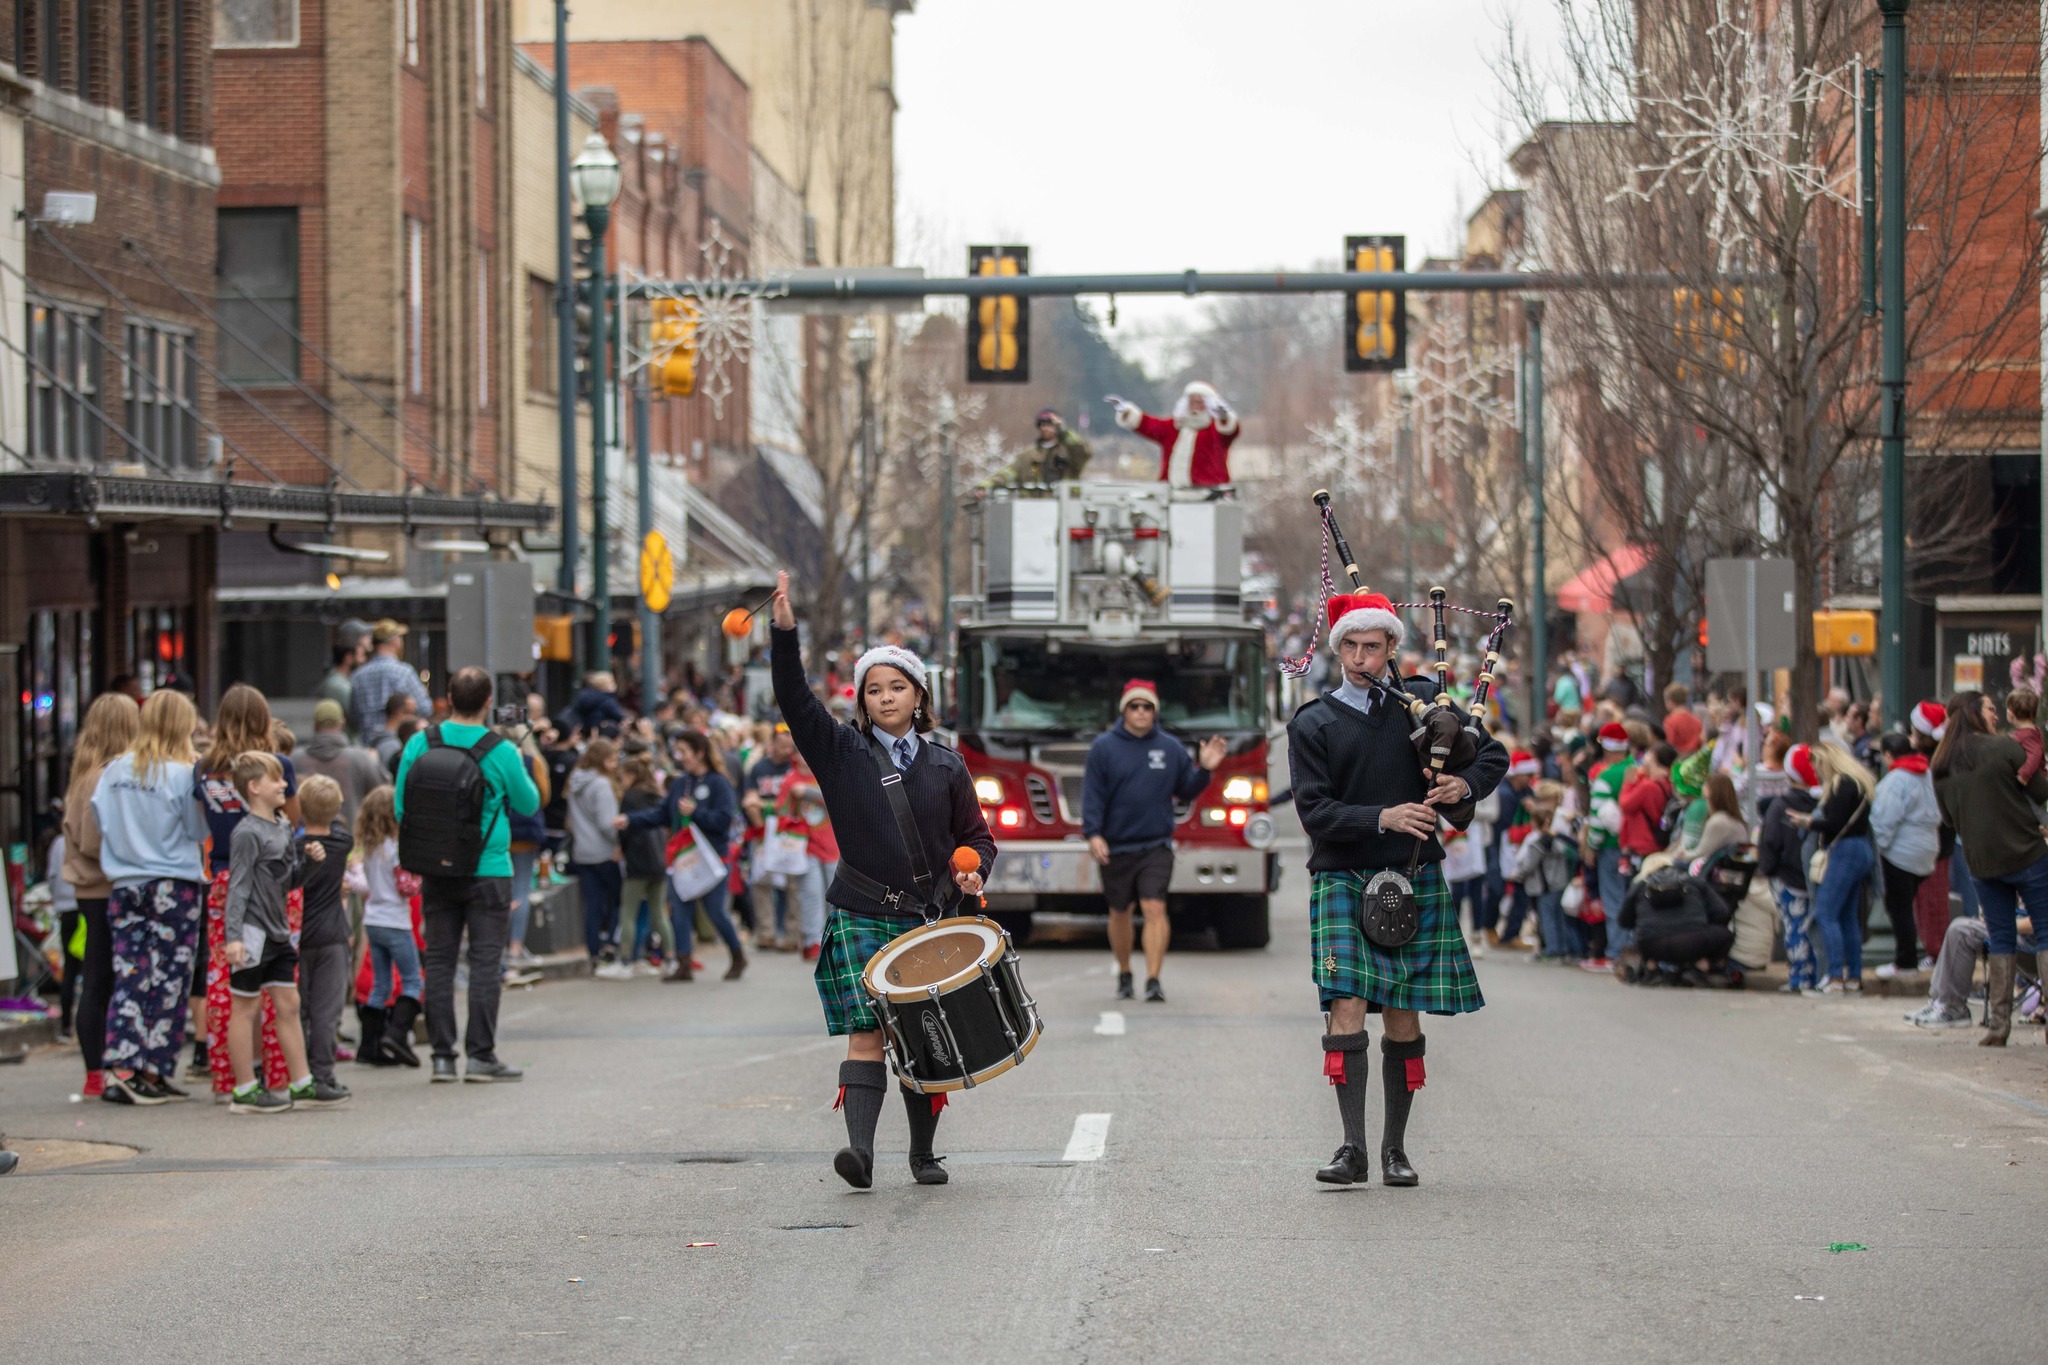 Theme and date announced for 2022 Johnson City Christmas Parade 96.9 WXBQ